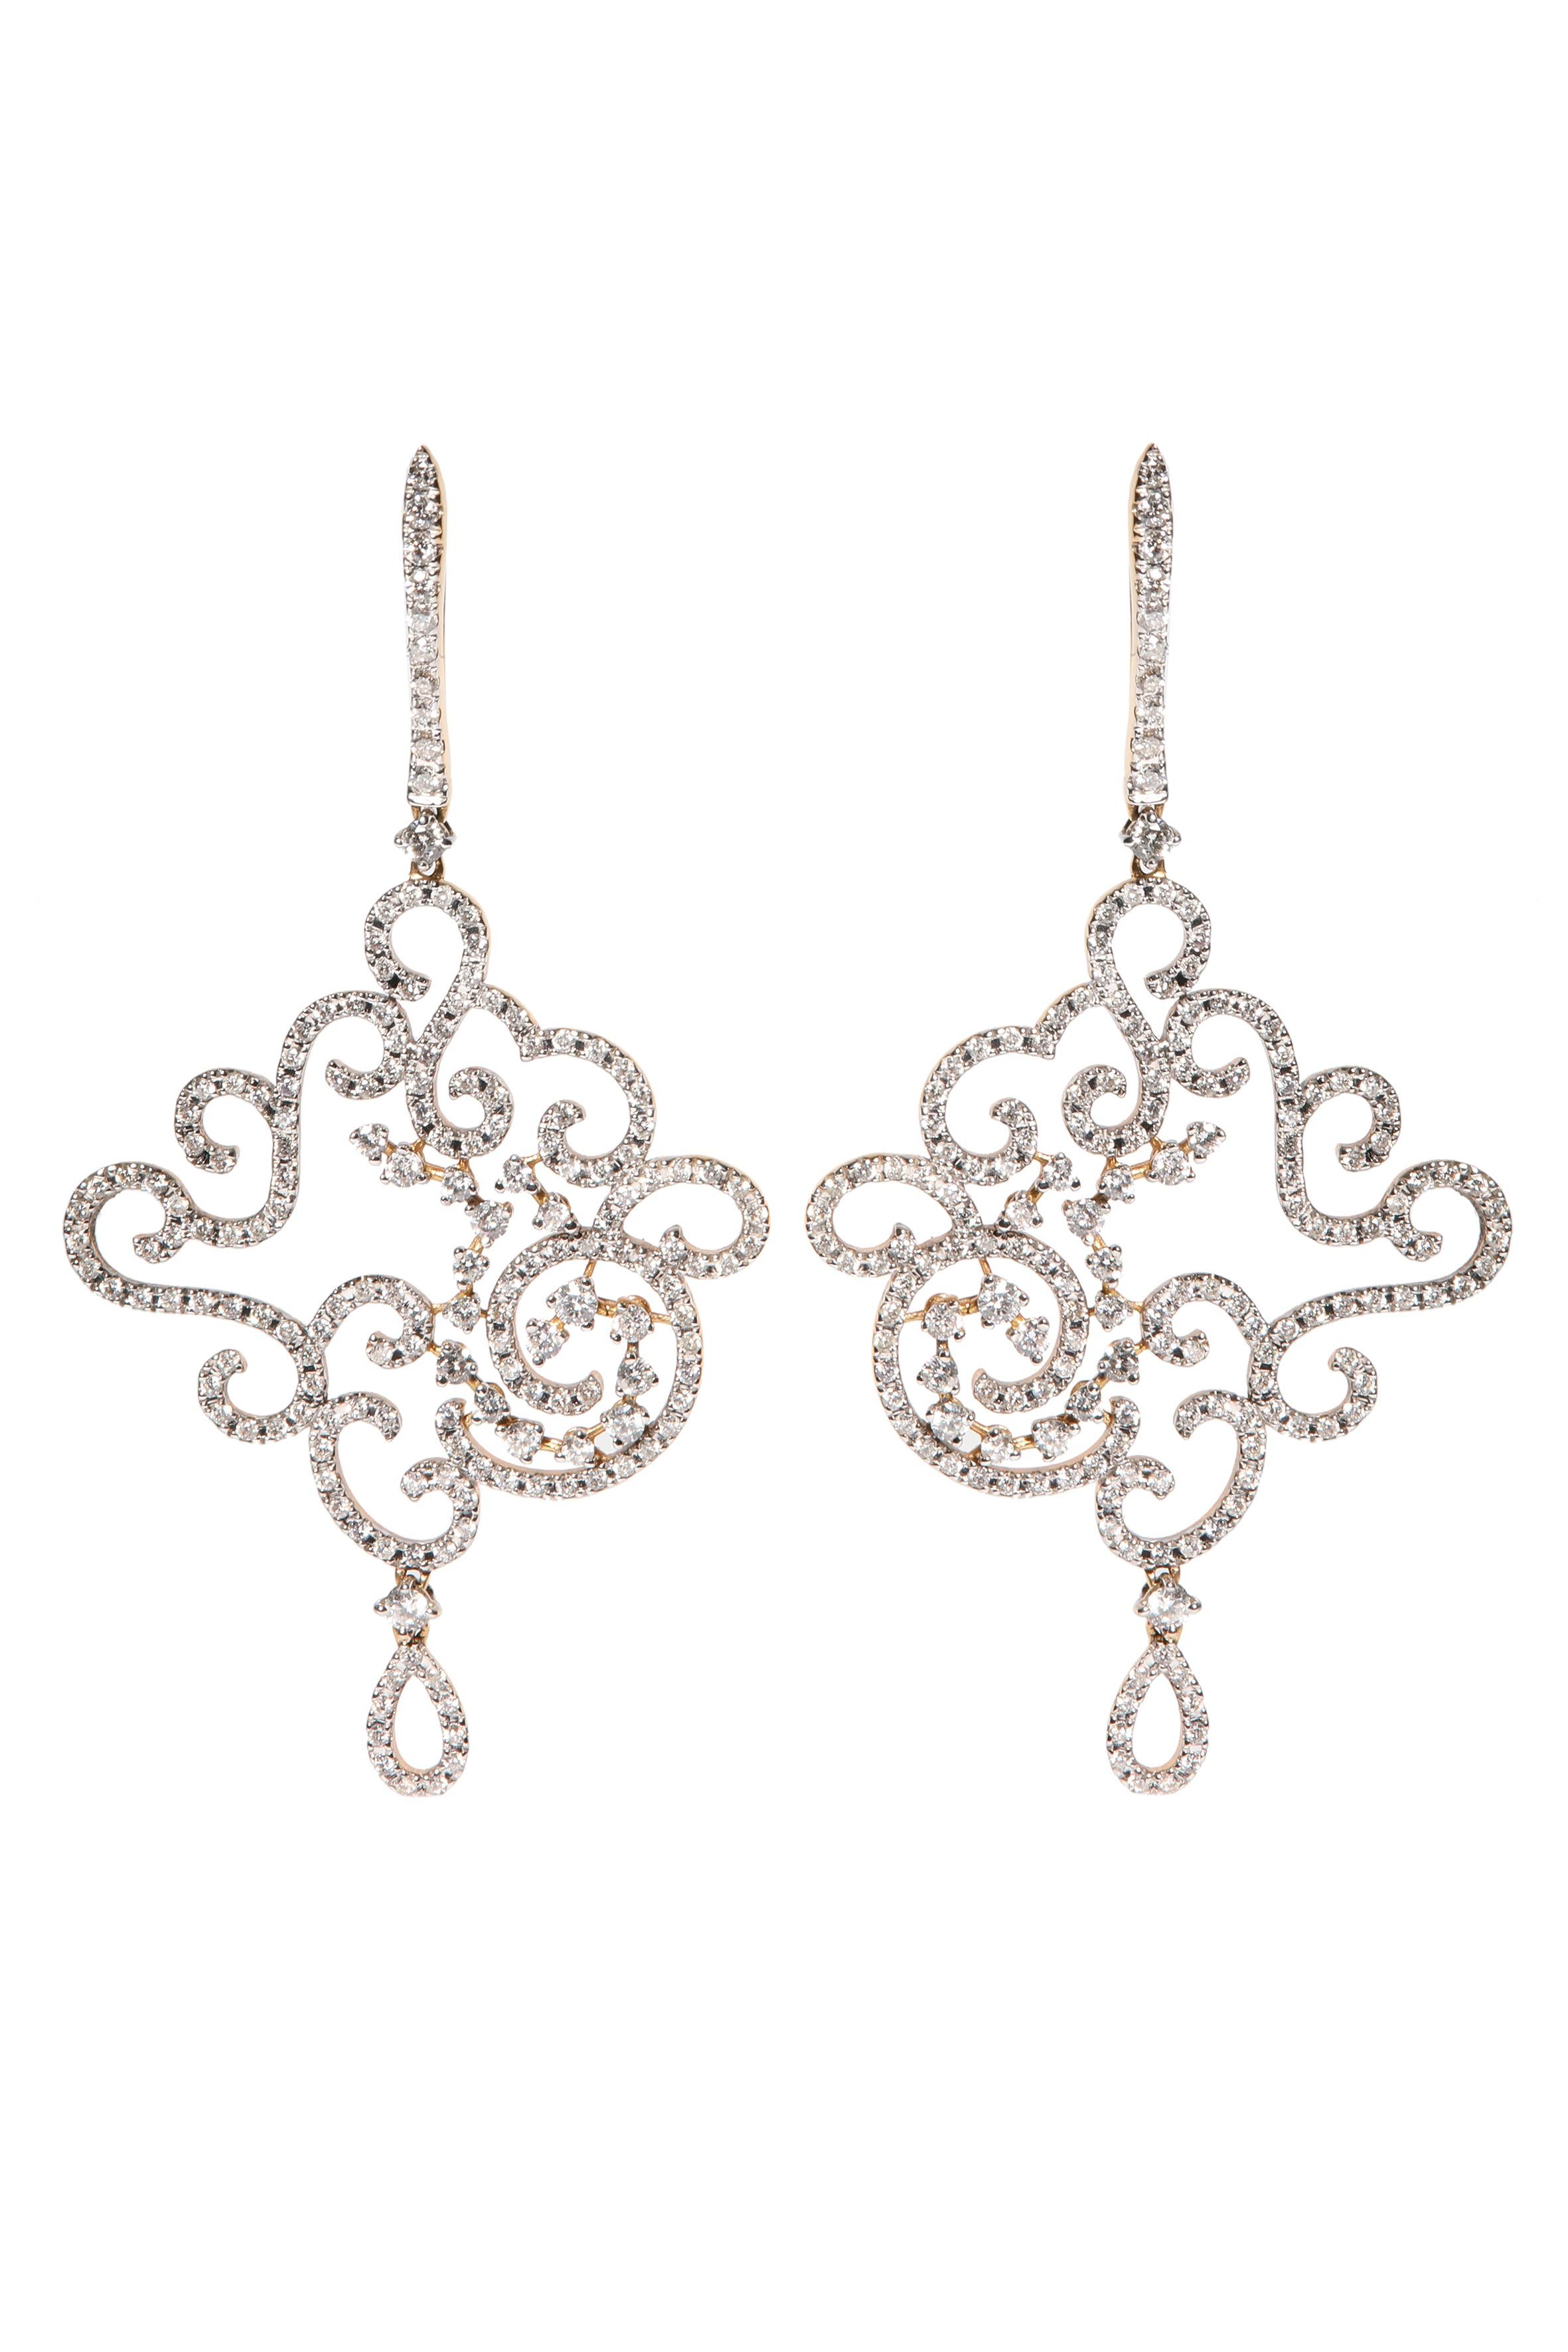 Artistic ingenuity and exceptional craftsmanship. These earrings celebrate special lifetime events, milestones and memorable moments. Crafted in 18 karat rose gold with a total of 134 brilliant cut diamonds a total of 4.14ct in a Top Wesselton